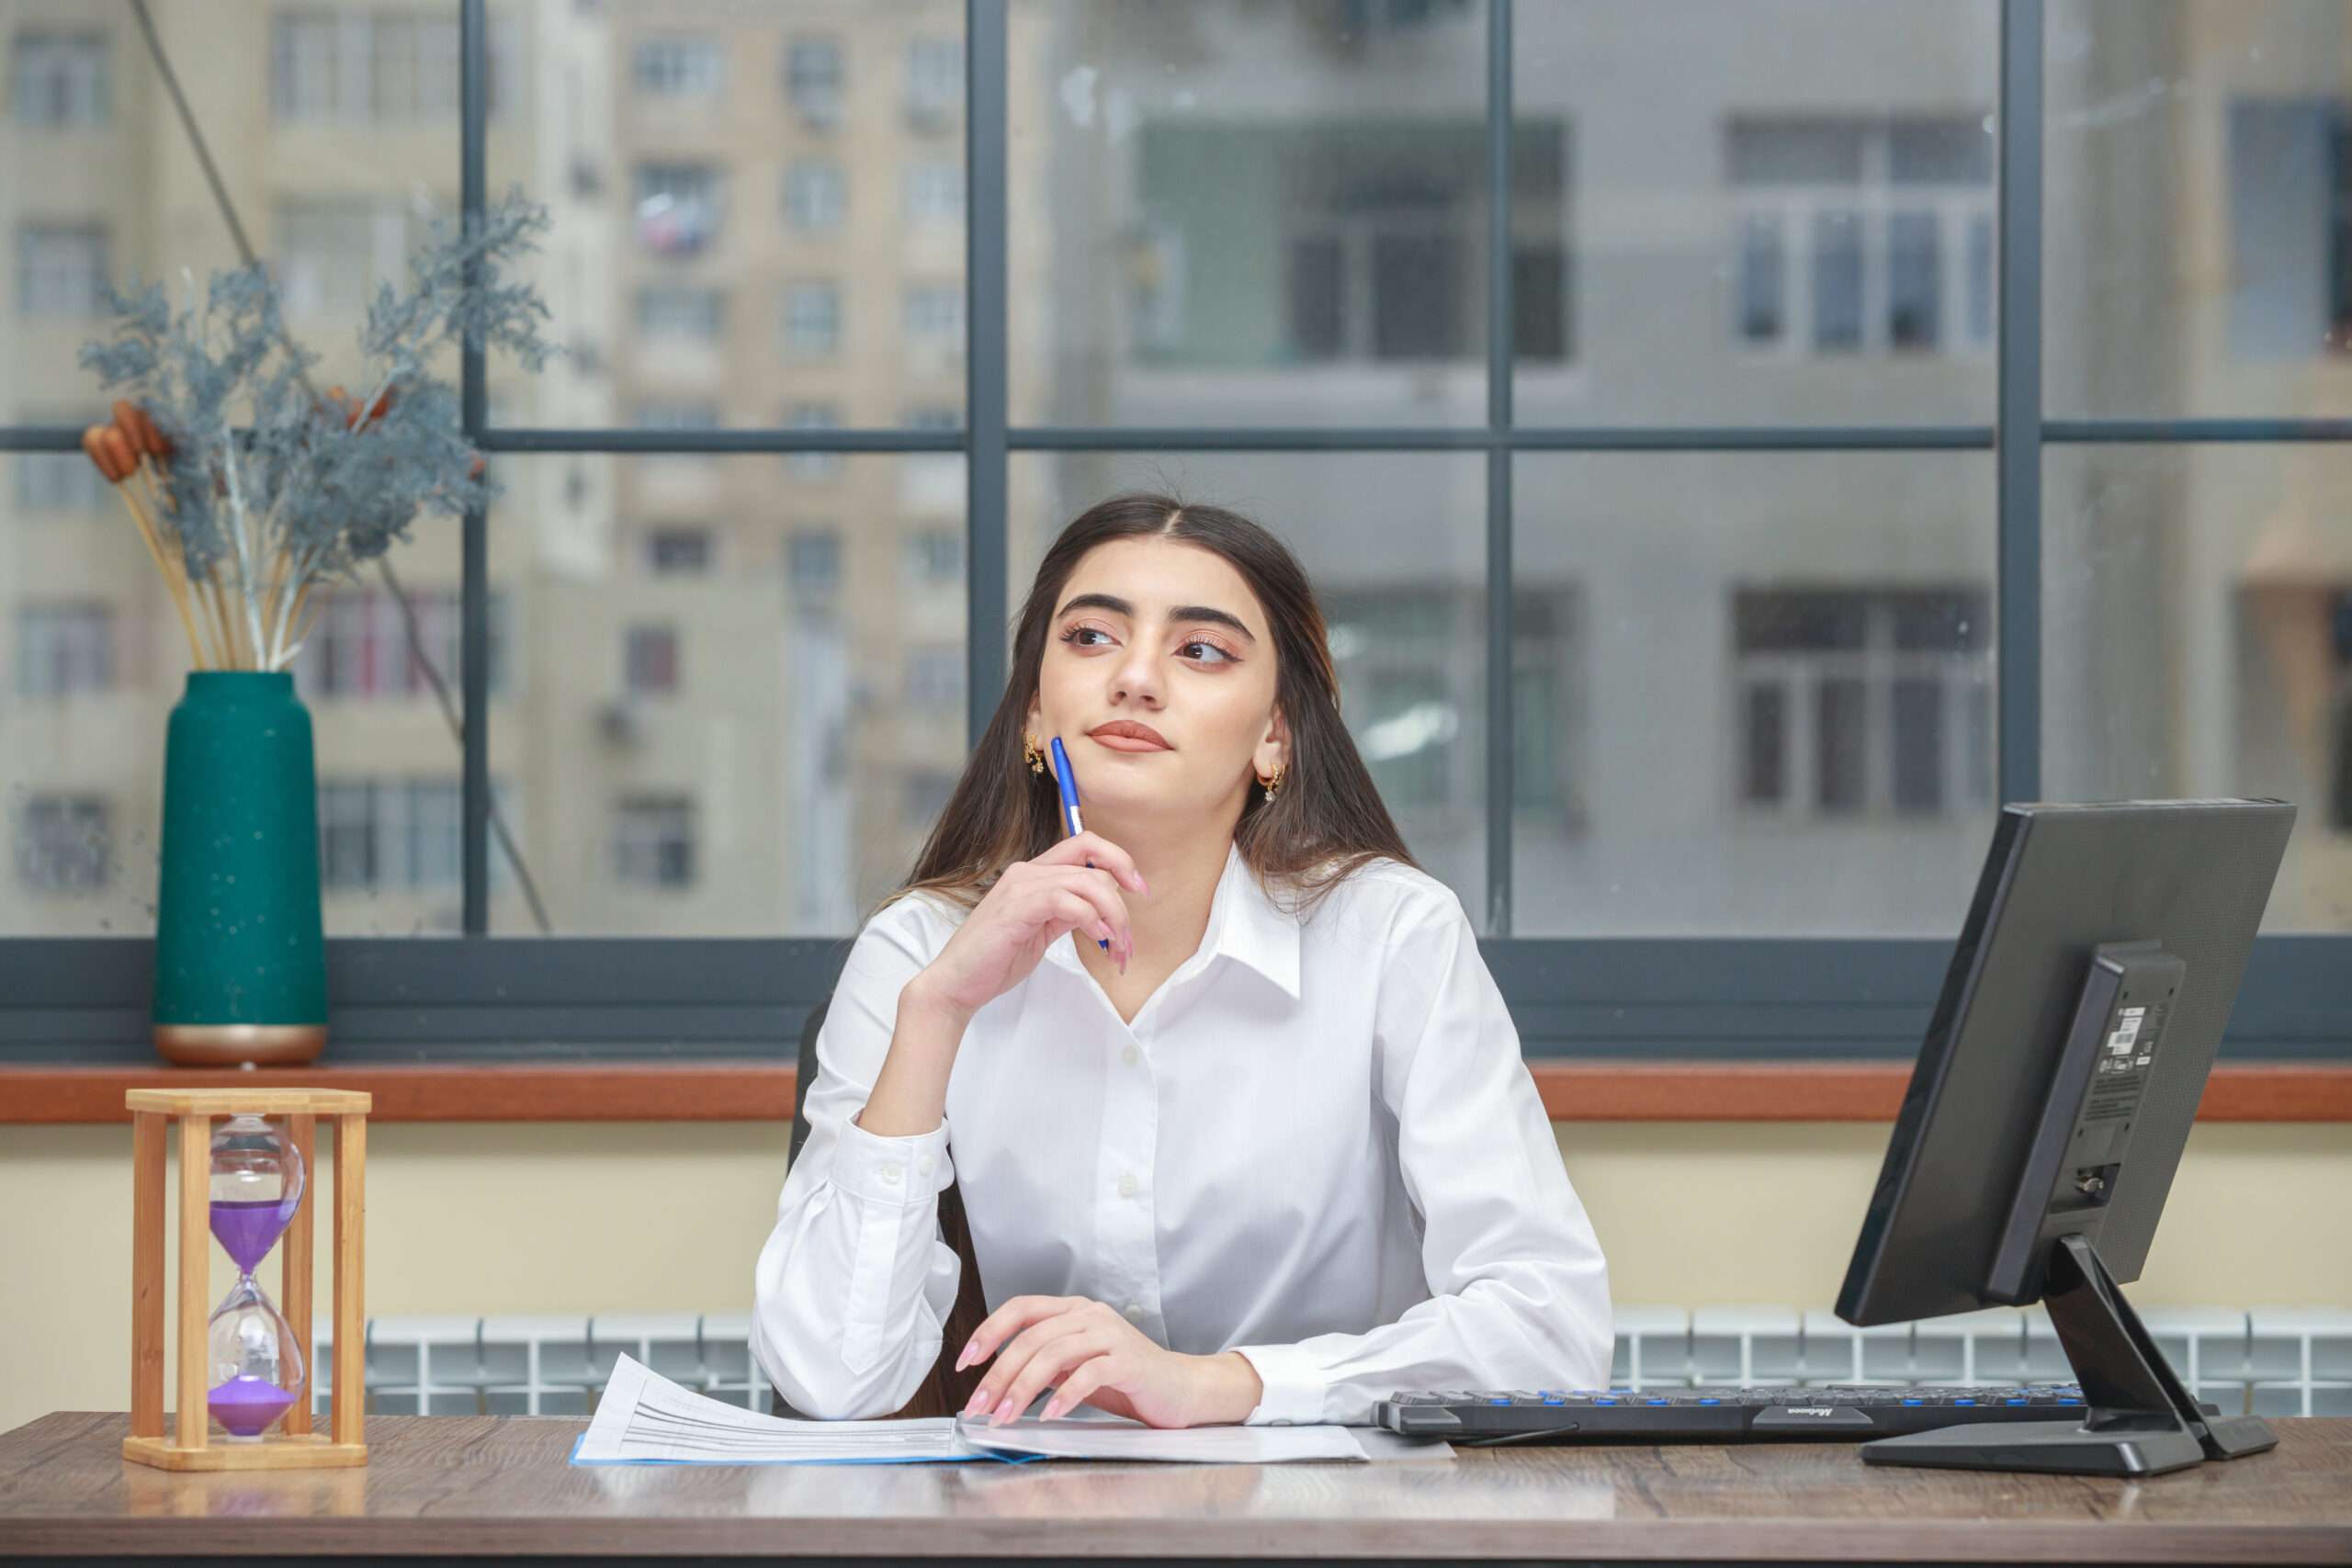 Portrait of a young businesswoman sitting at the desk and put her pen to her chin while thinking